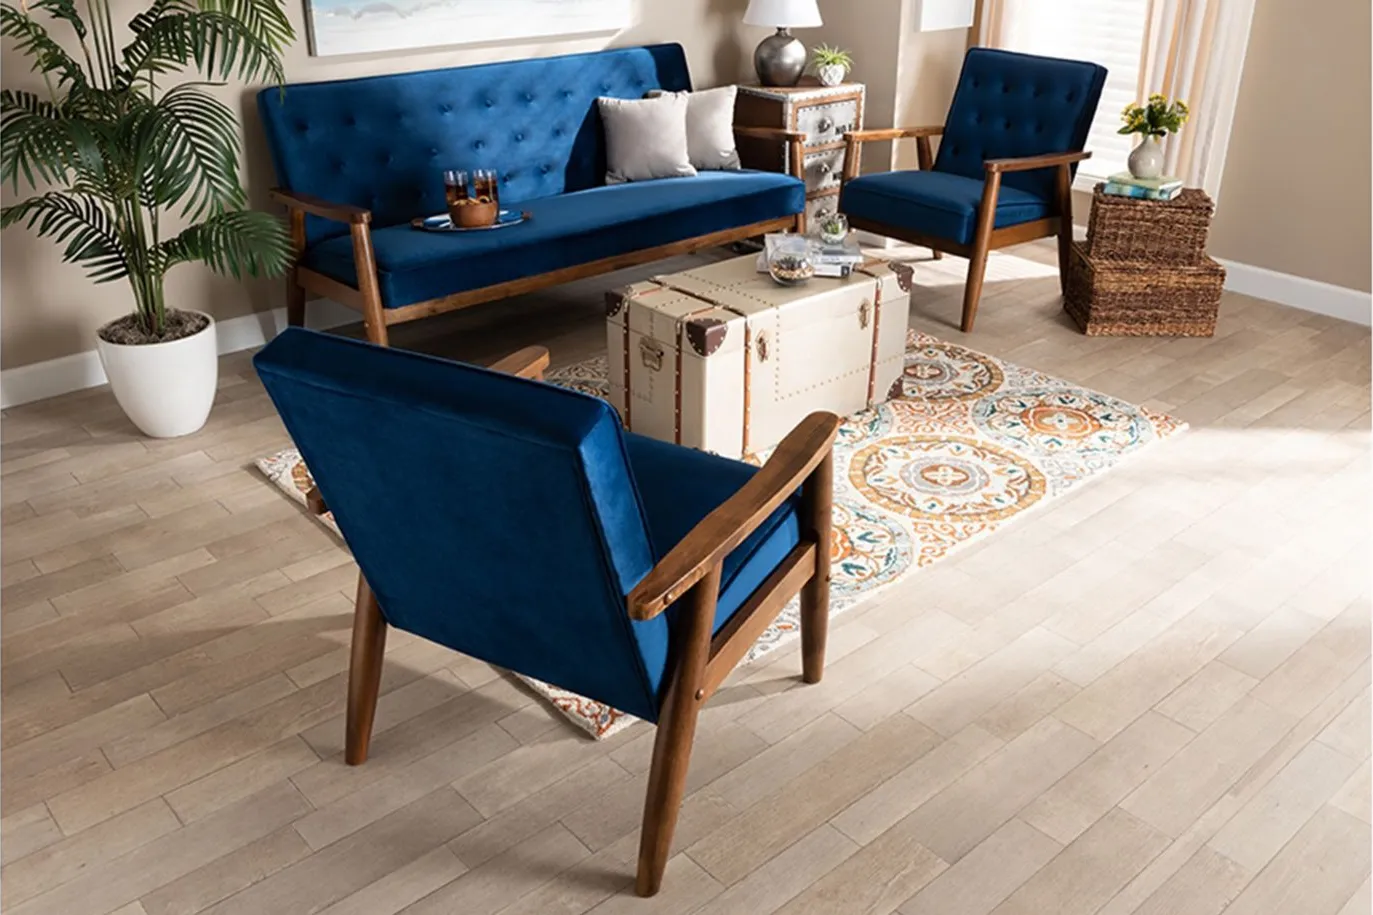 Sorrento 3-pc. Living Room Set in Navy Blue/Brown by Wholesale Interiors